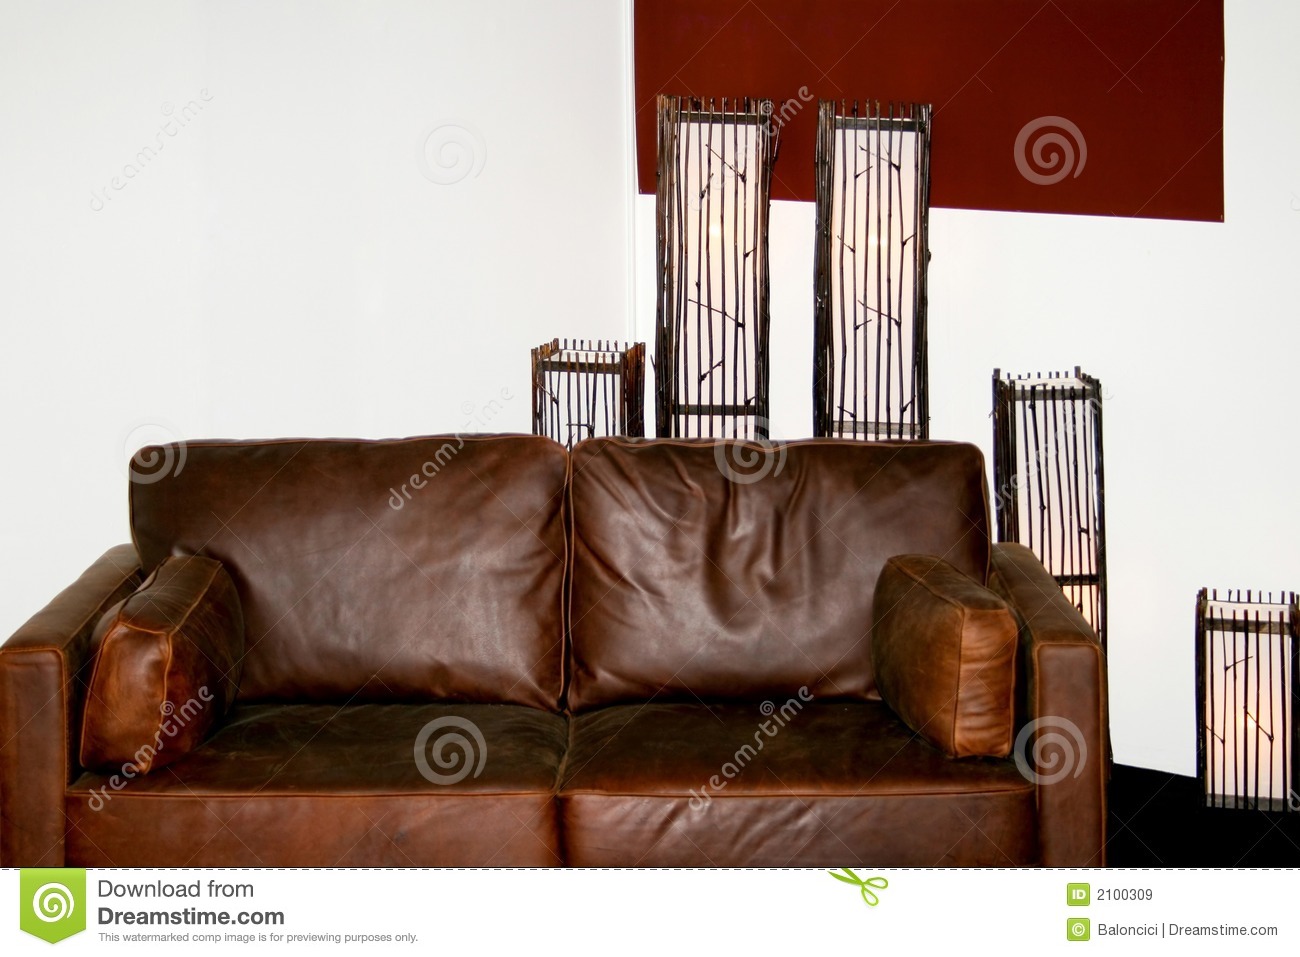 Sofa And Lamps Royalty Free Stock Images   Image  2100309